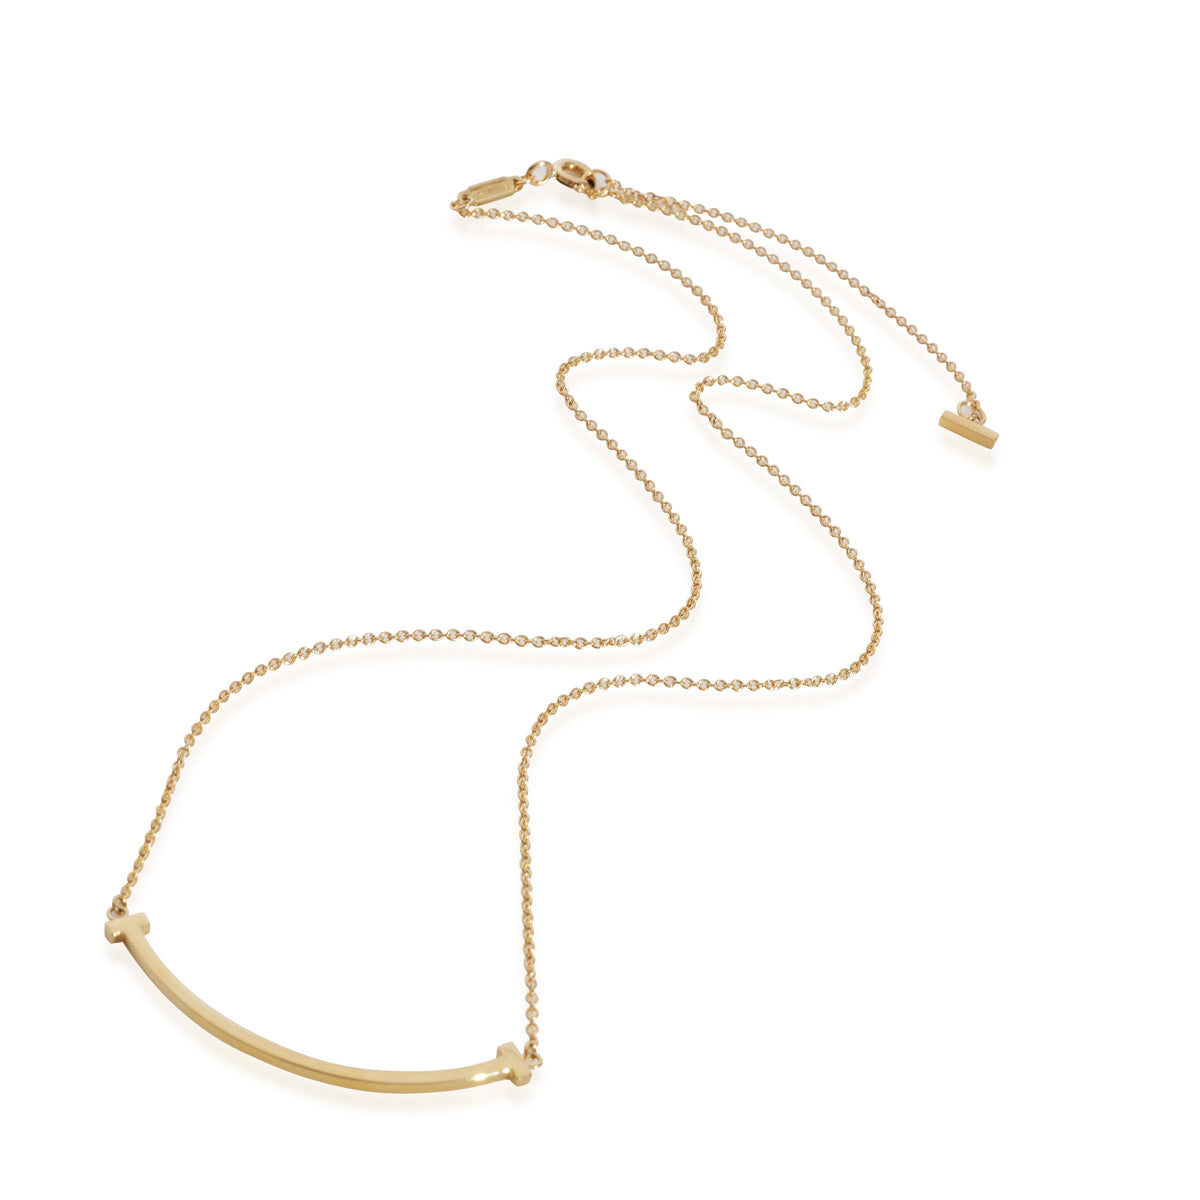 Tiffany & Co. Smile Necklace in 18k Yellow Gold